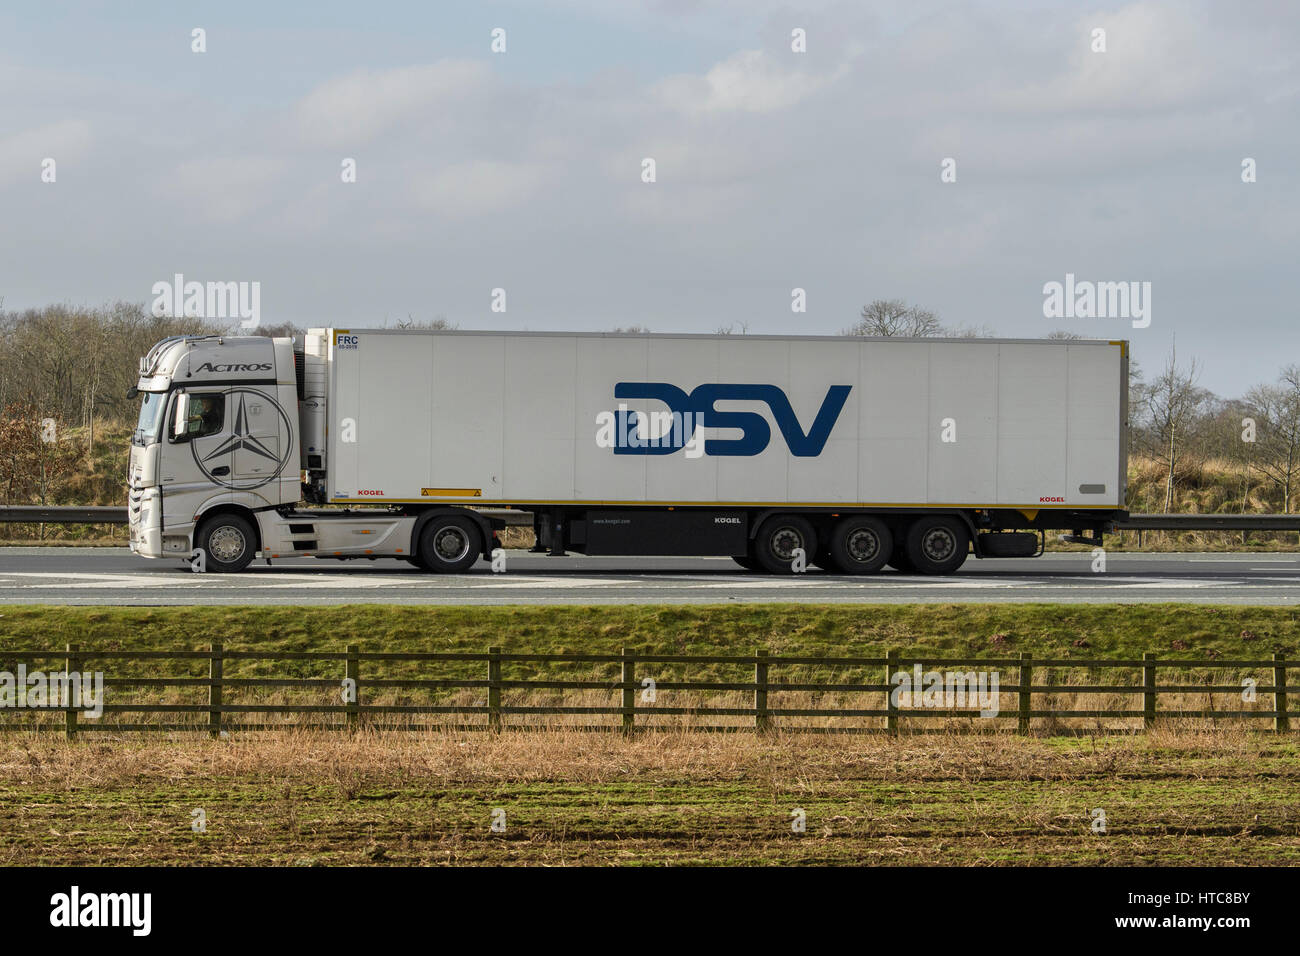 Distribution & transportation - an articulated lorry, heavy goods vehicle (HGV) with DSV slogan, travelling on the A1 motorway - England, GB, UK. Stock Photo